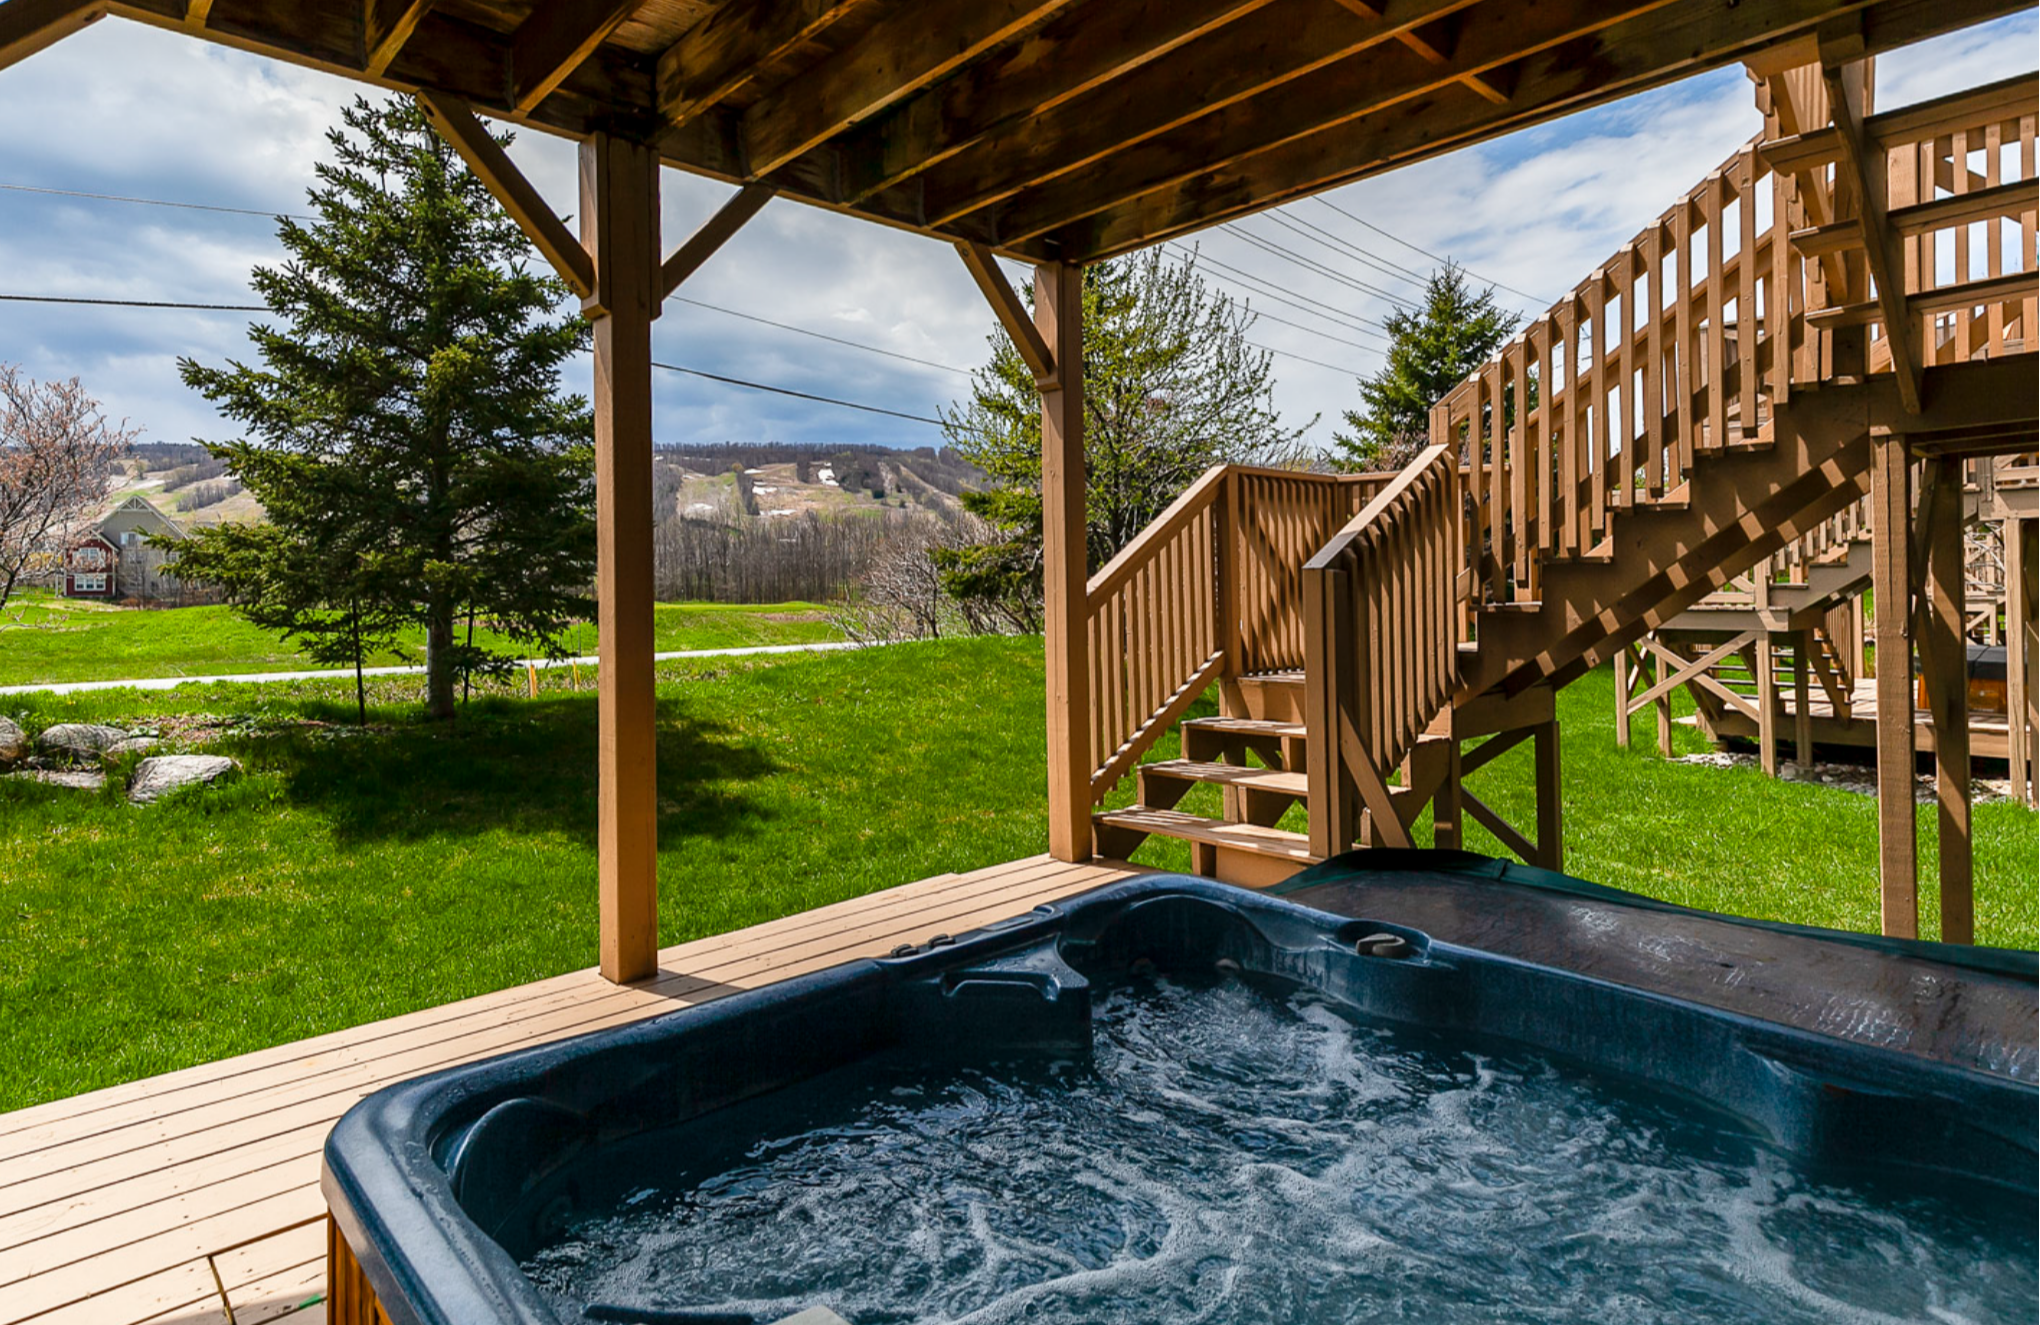 A view of a hot tub in a Blue View Chalet rental in the Blue Mountains